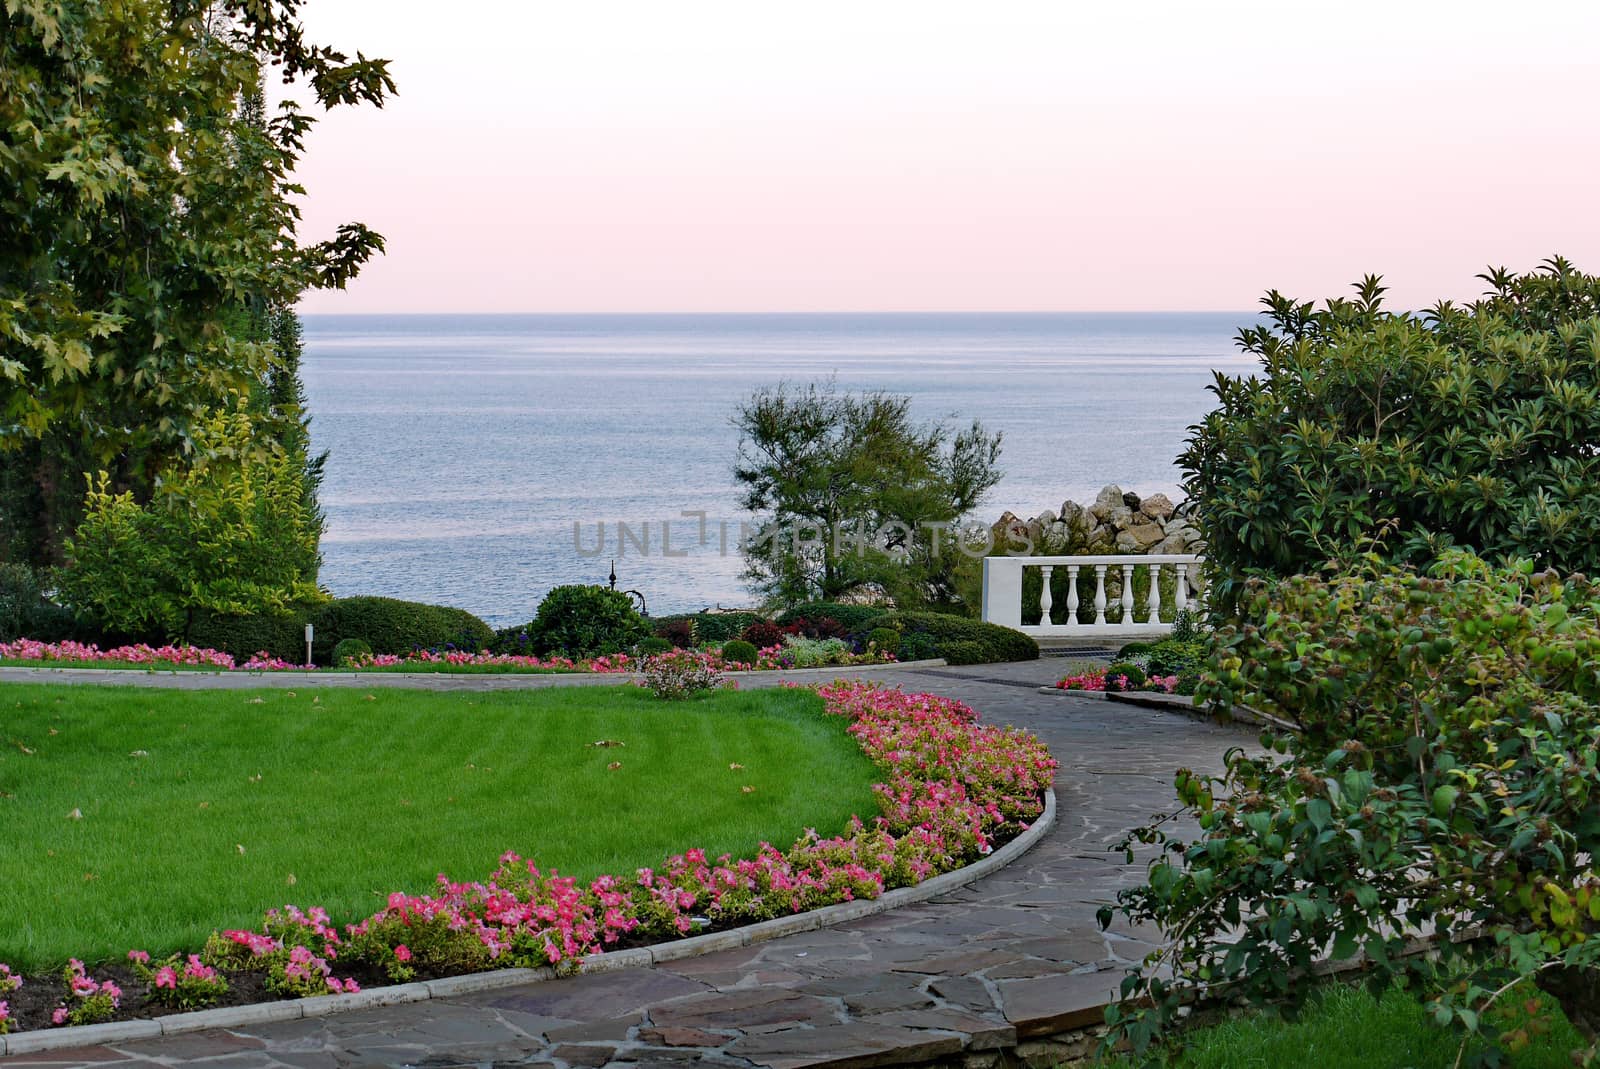 The path in the park is paved from a large variety of plates enveloping a green lawn with a flower bed on one side and with a beautiful view of the sea from the other.